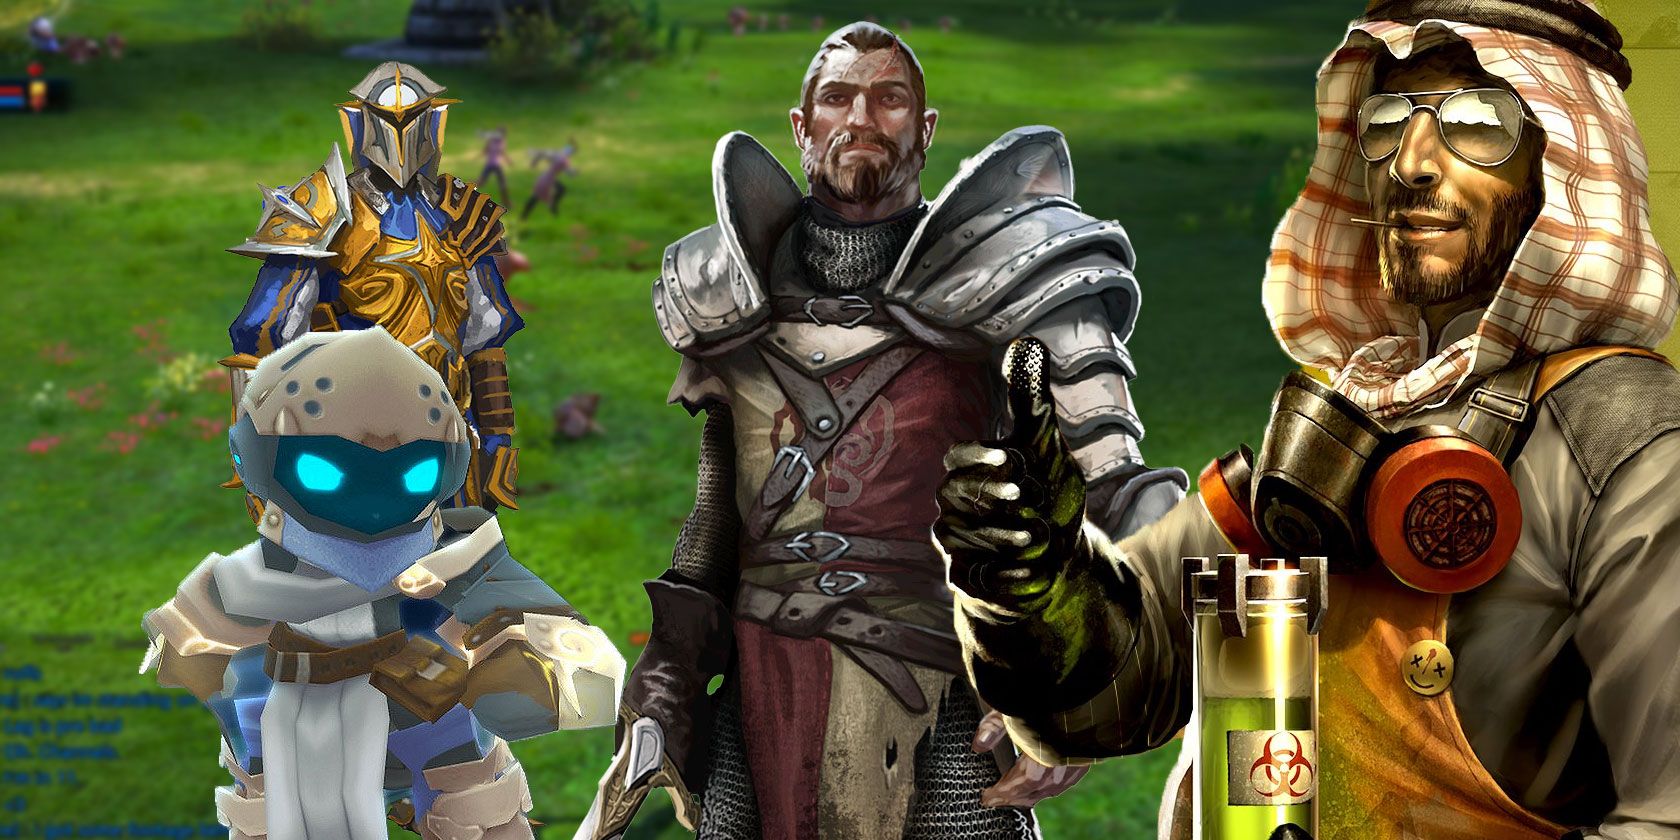 The 10 Best Free MMORPGs That Require No Download